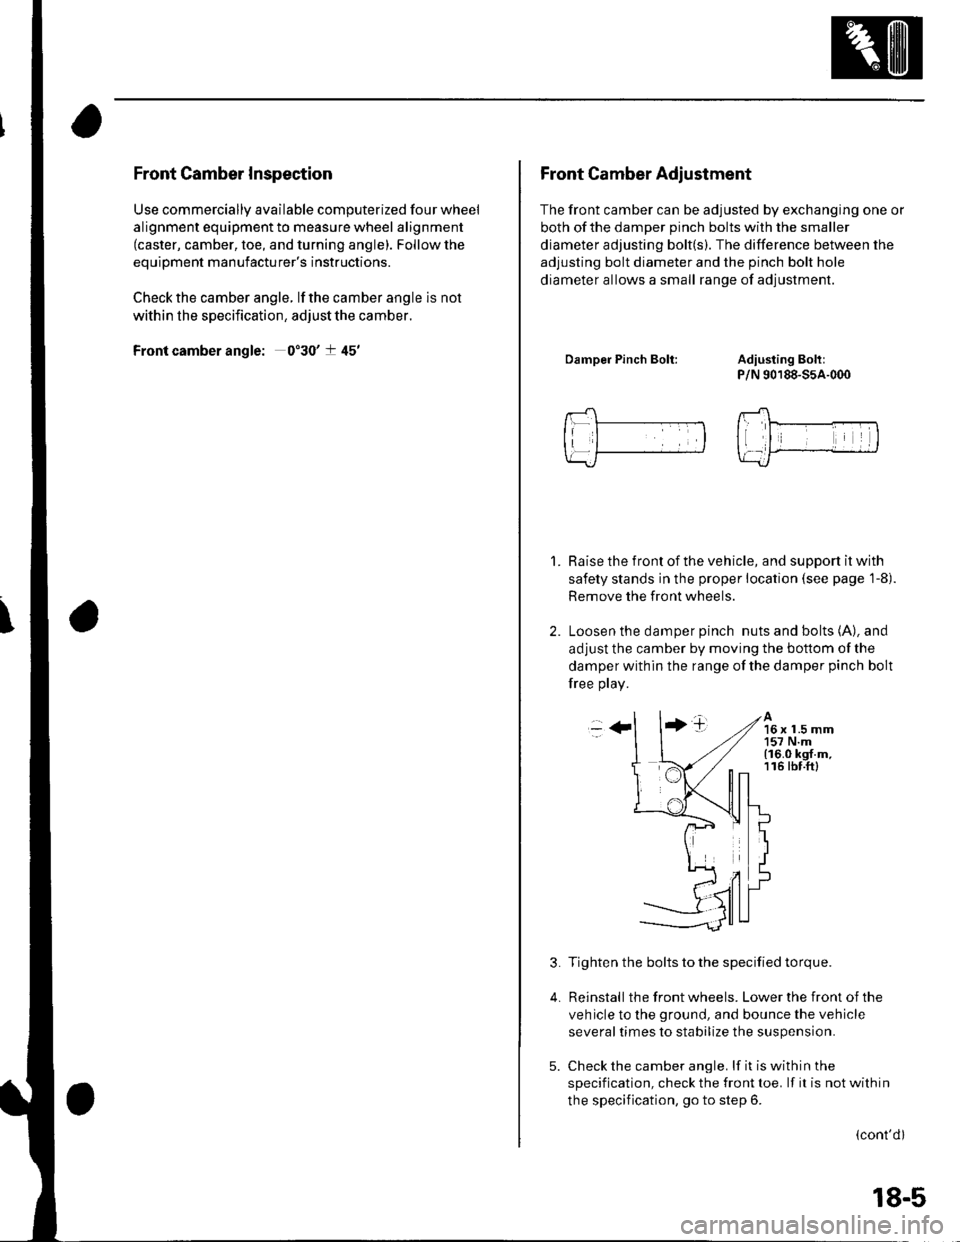 HONDA CIVIC 2002 7.G Workshop Manual Front Camber Inspection
Use commercially available computerized four wheel
alignment equipment to measure wheel alignment(caster, camber, toe, and turning angle). Follow the
equipment manufacturers i